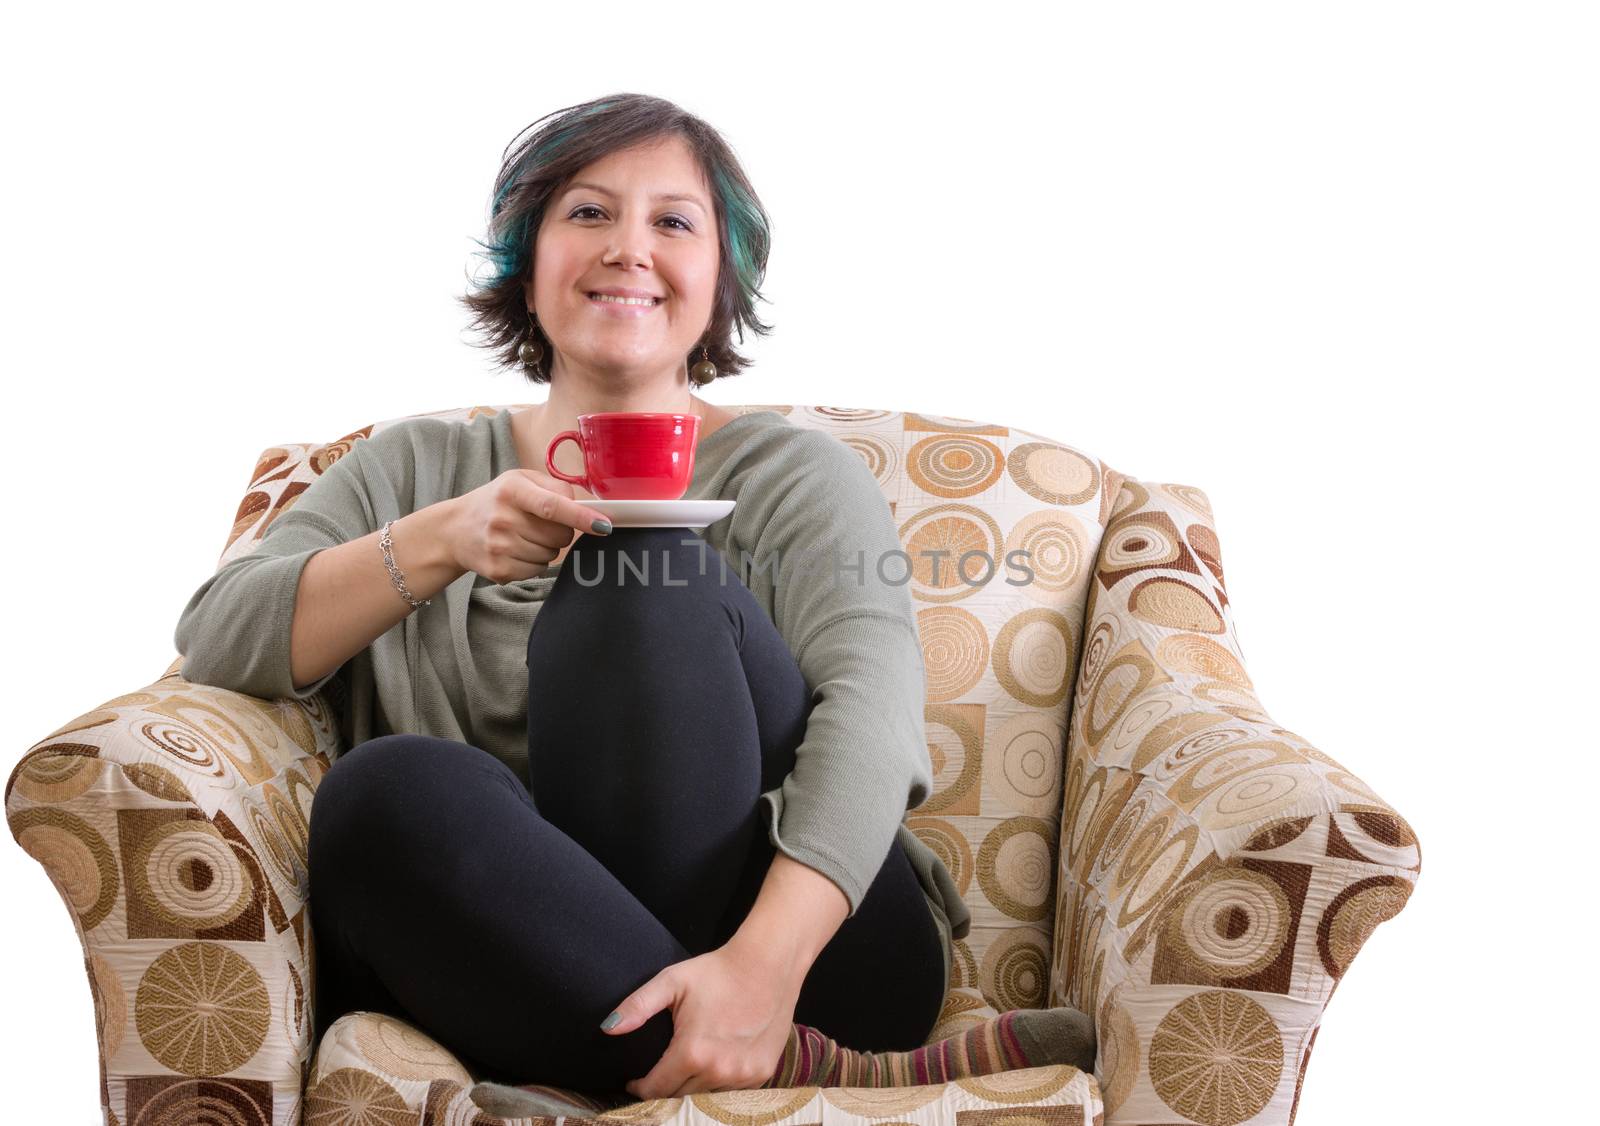 Single adult woman with smile sitting with red mug and crossed legs in sofa chair over white background